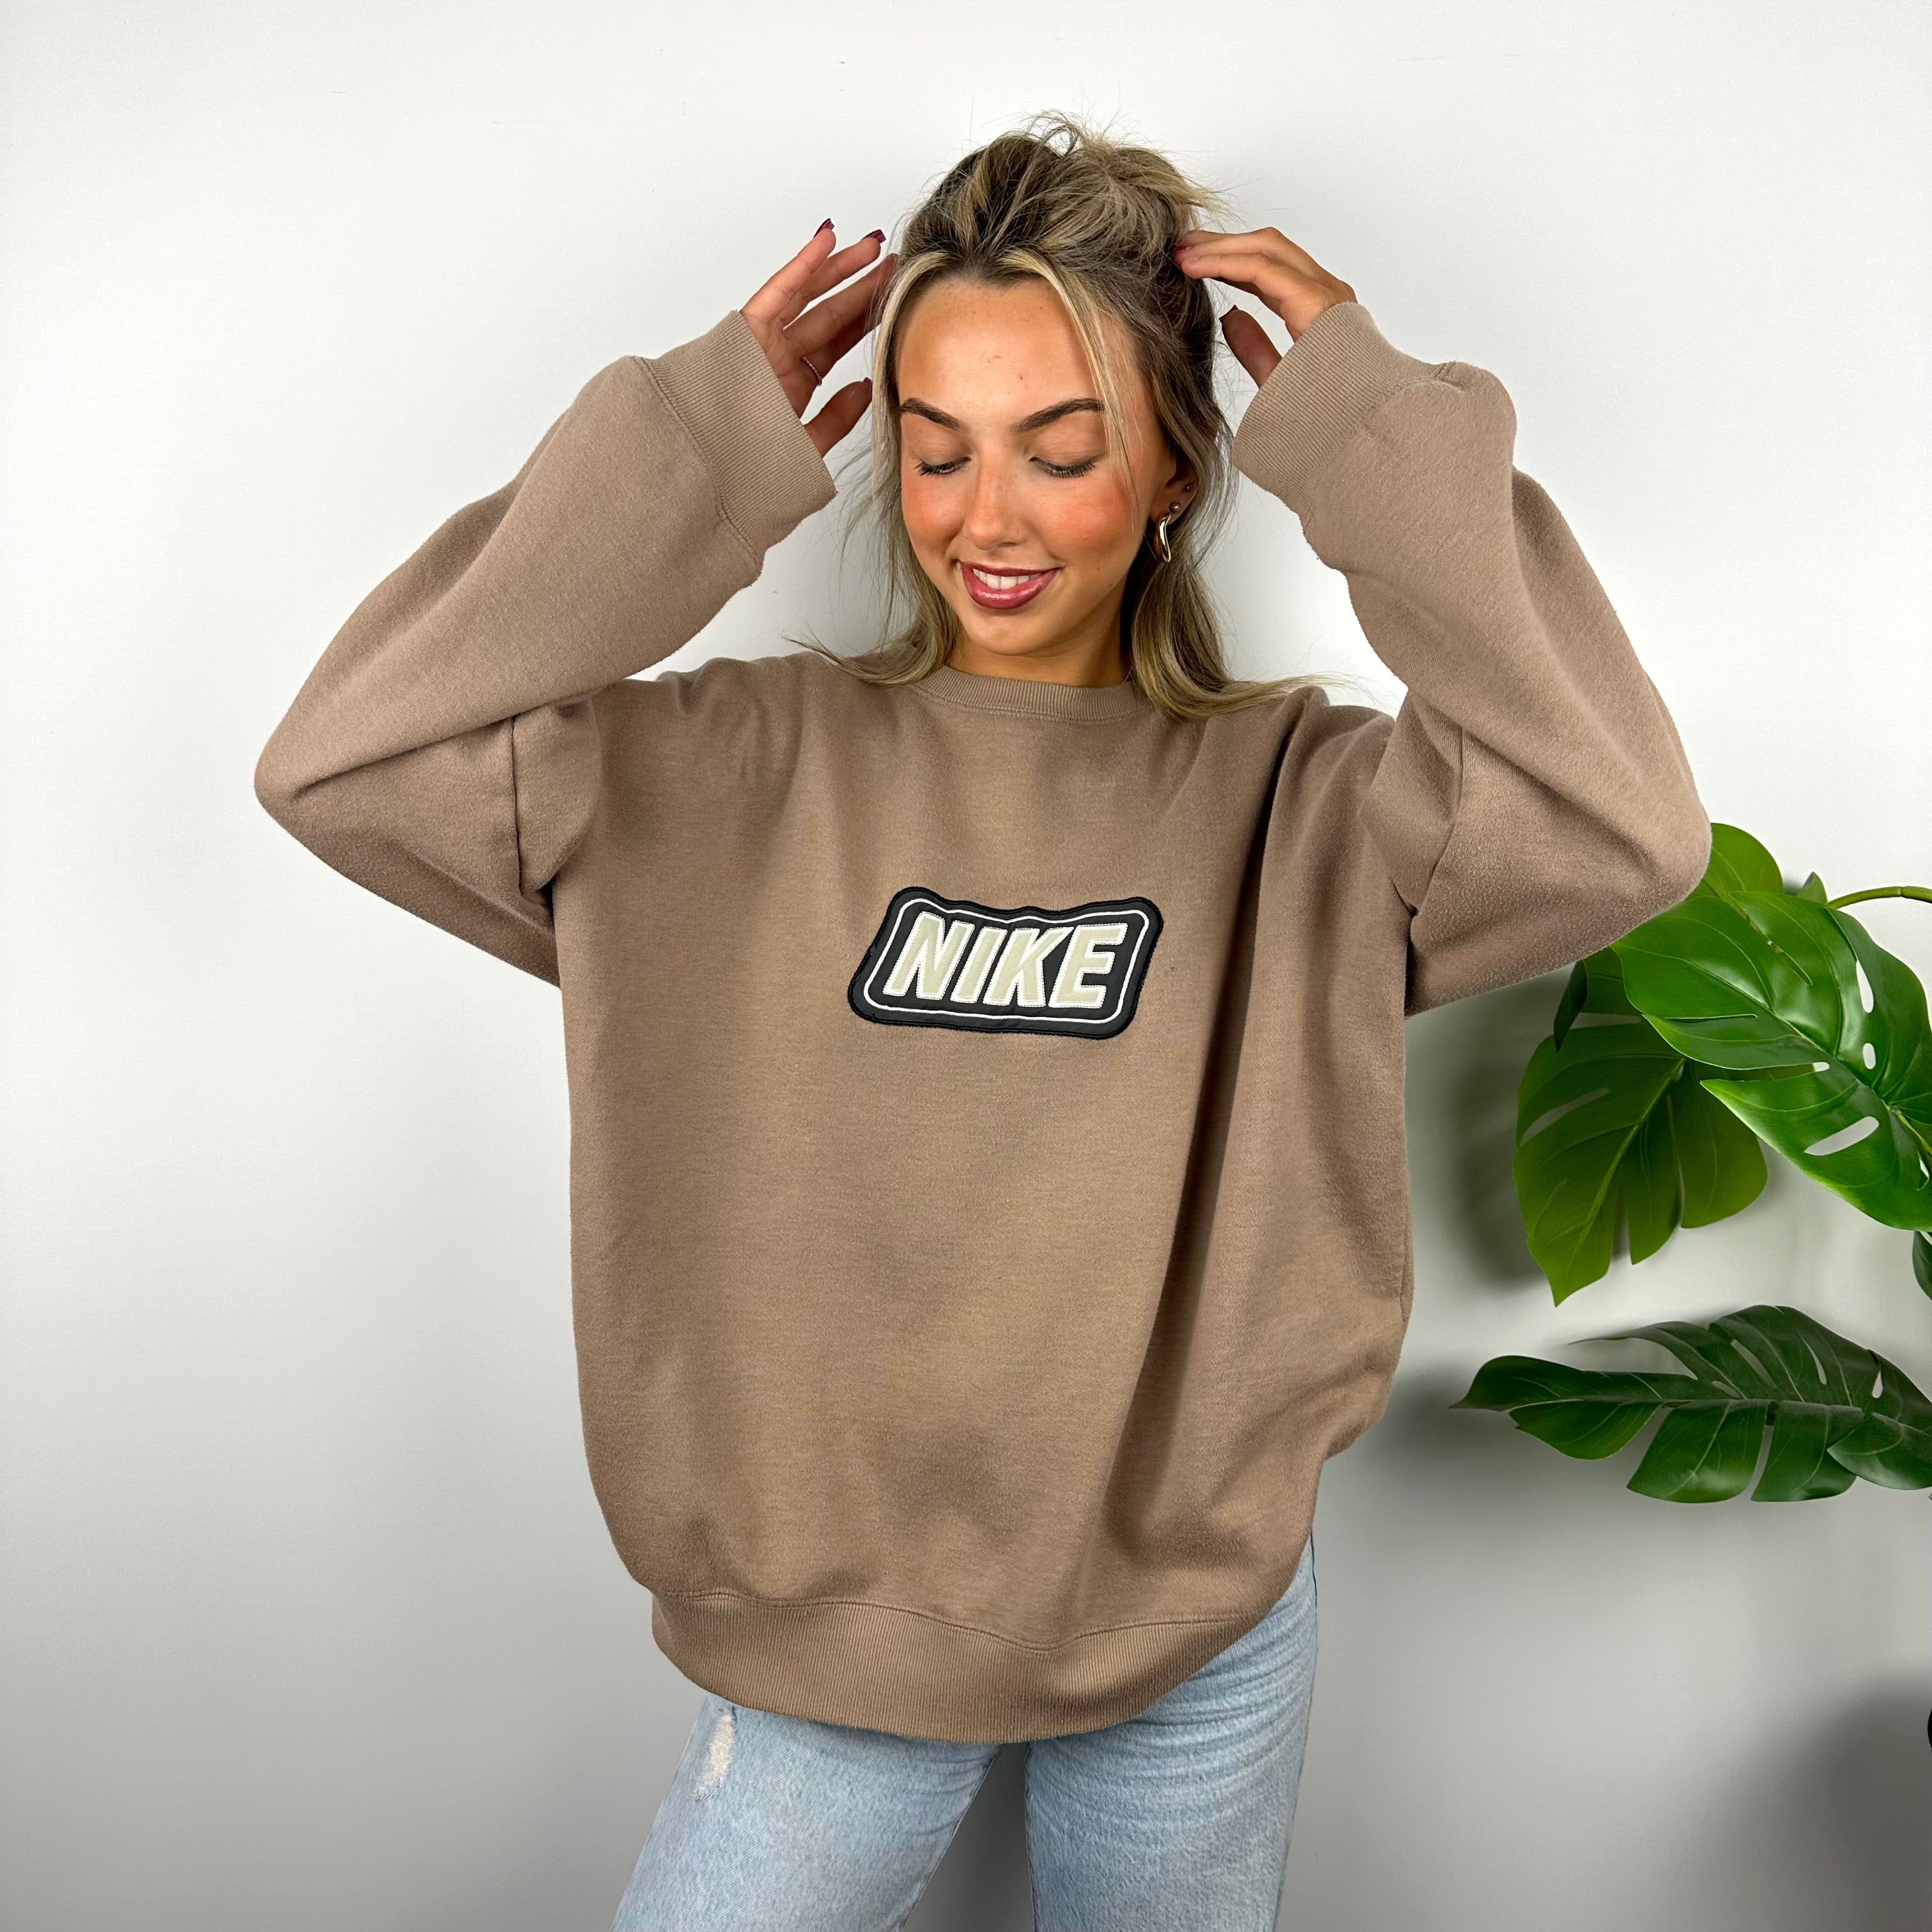 Nike Tan Brown Embroidered Spell Out Sweatshirt (L)